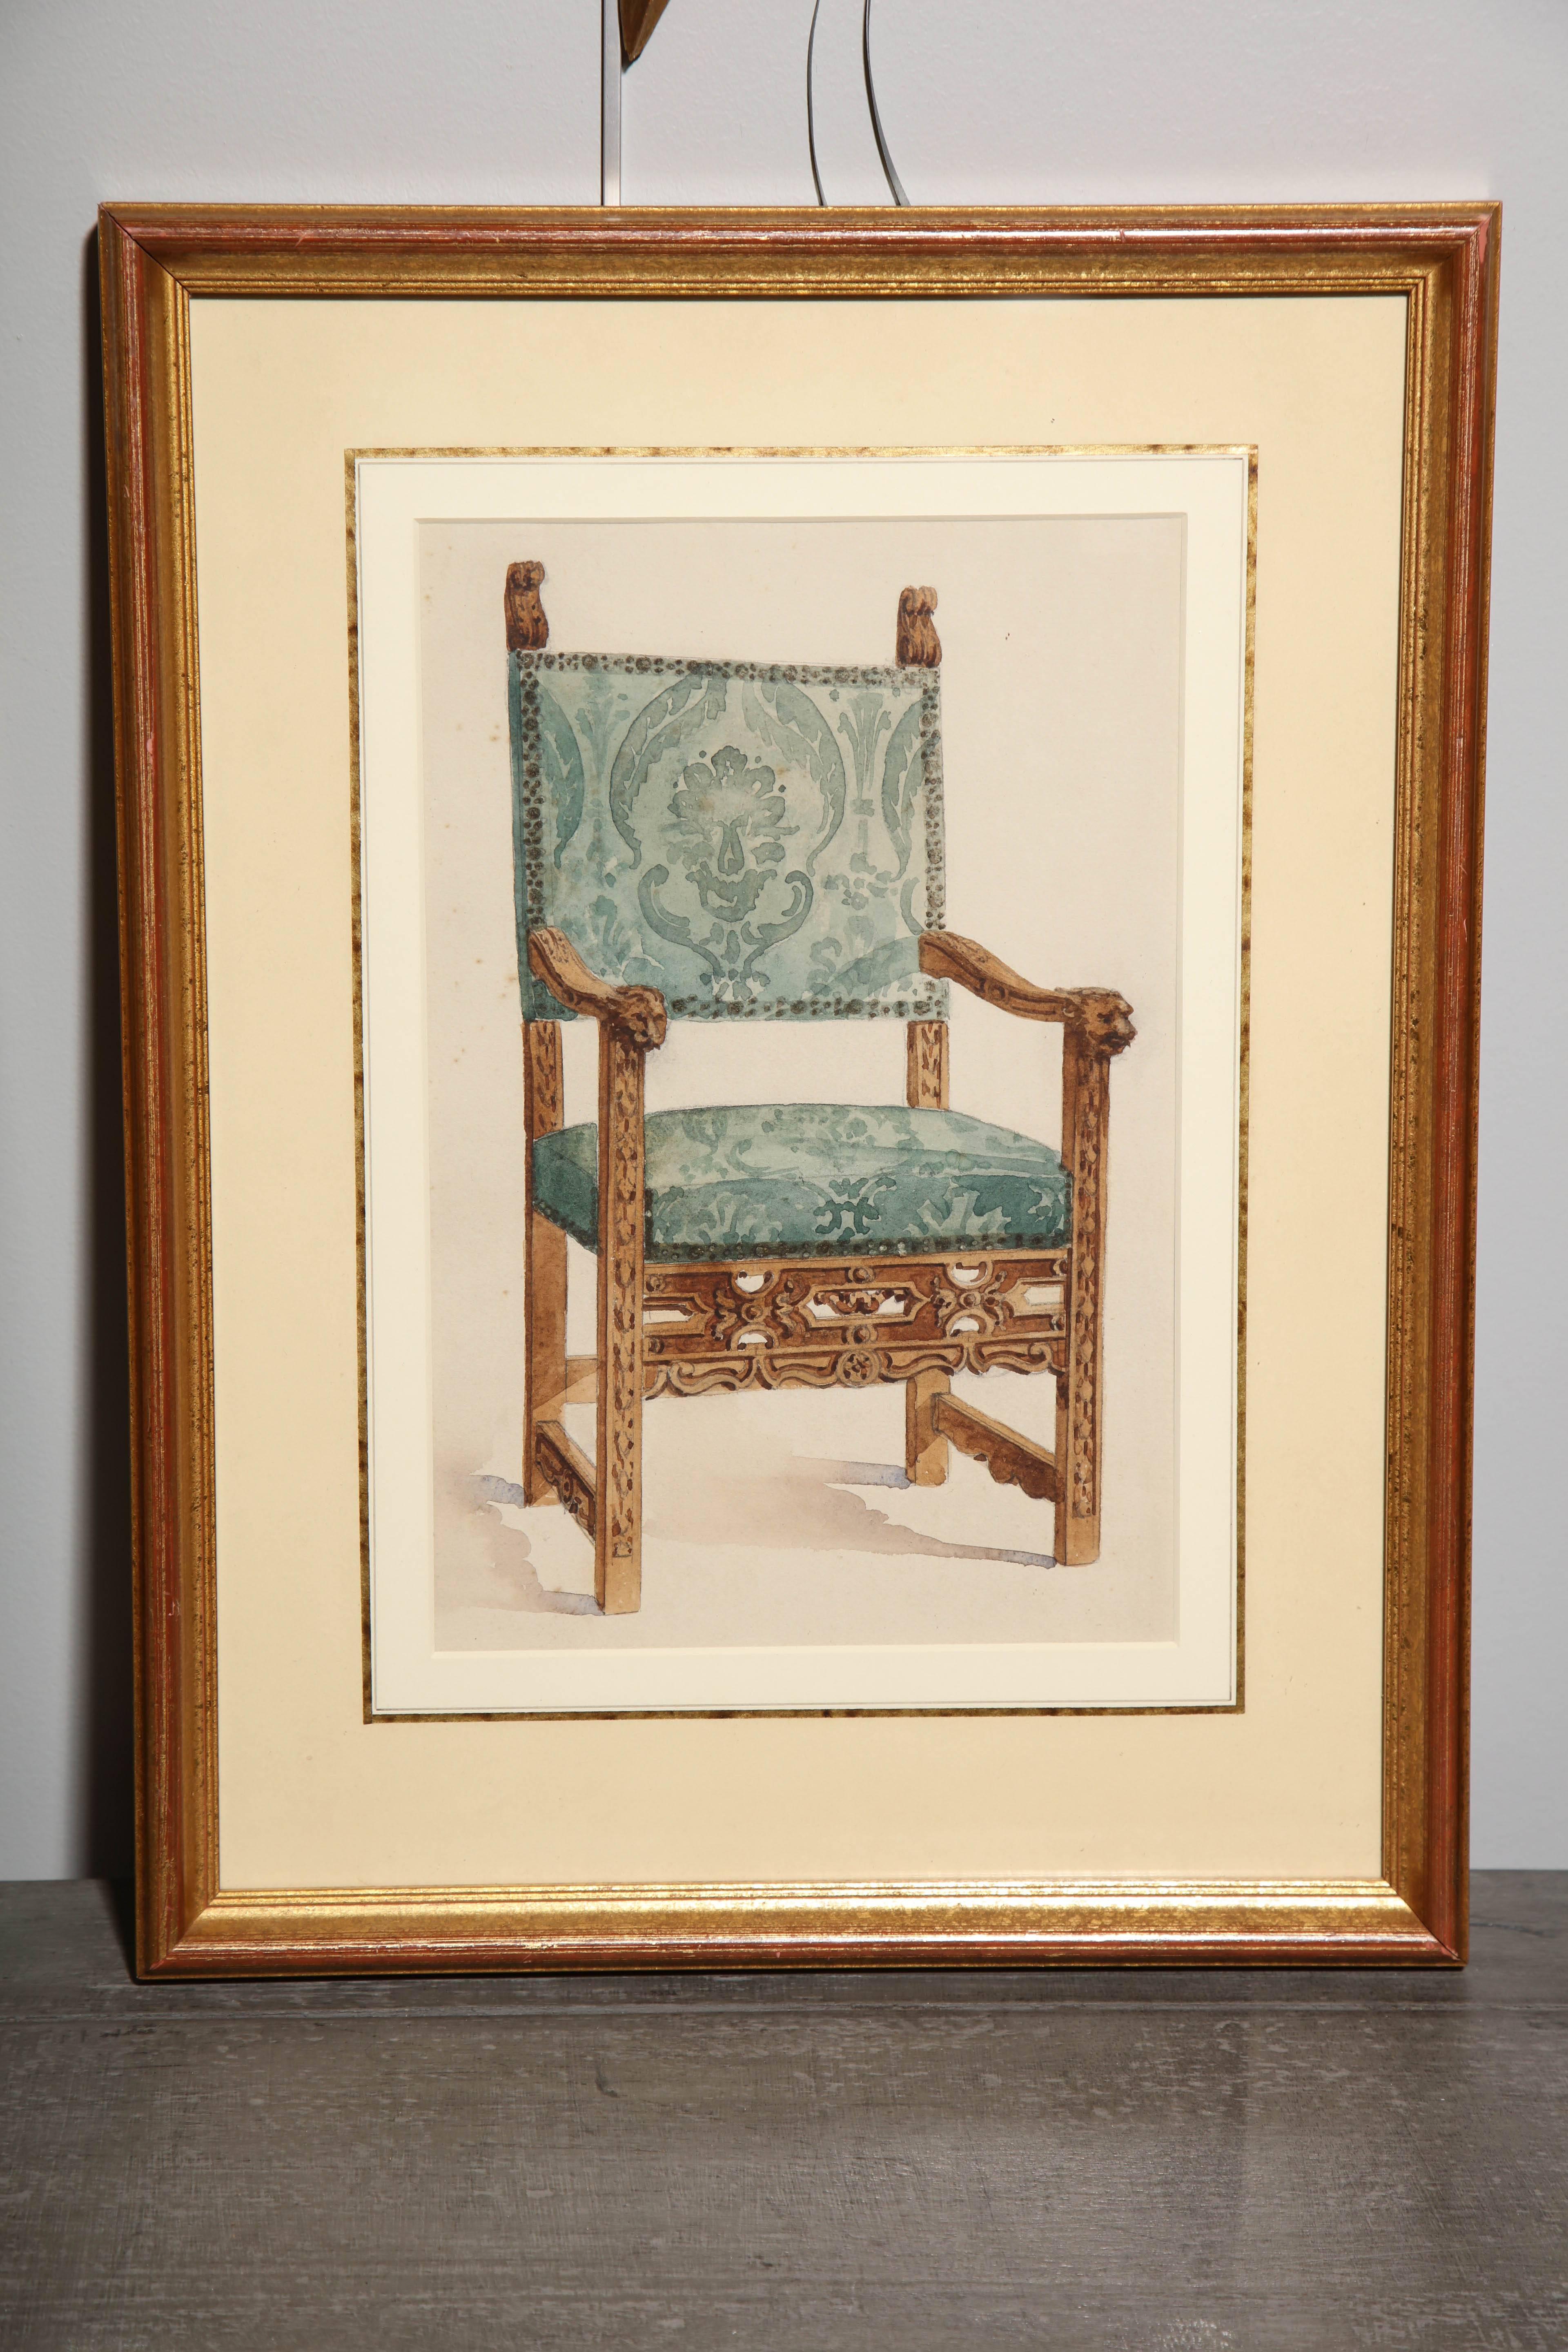 Series of Hand-Painted Drawings of Furniture 1